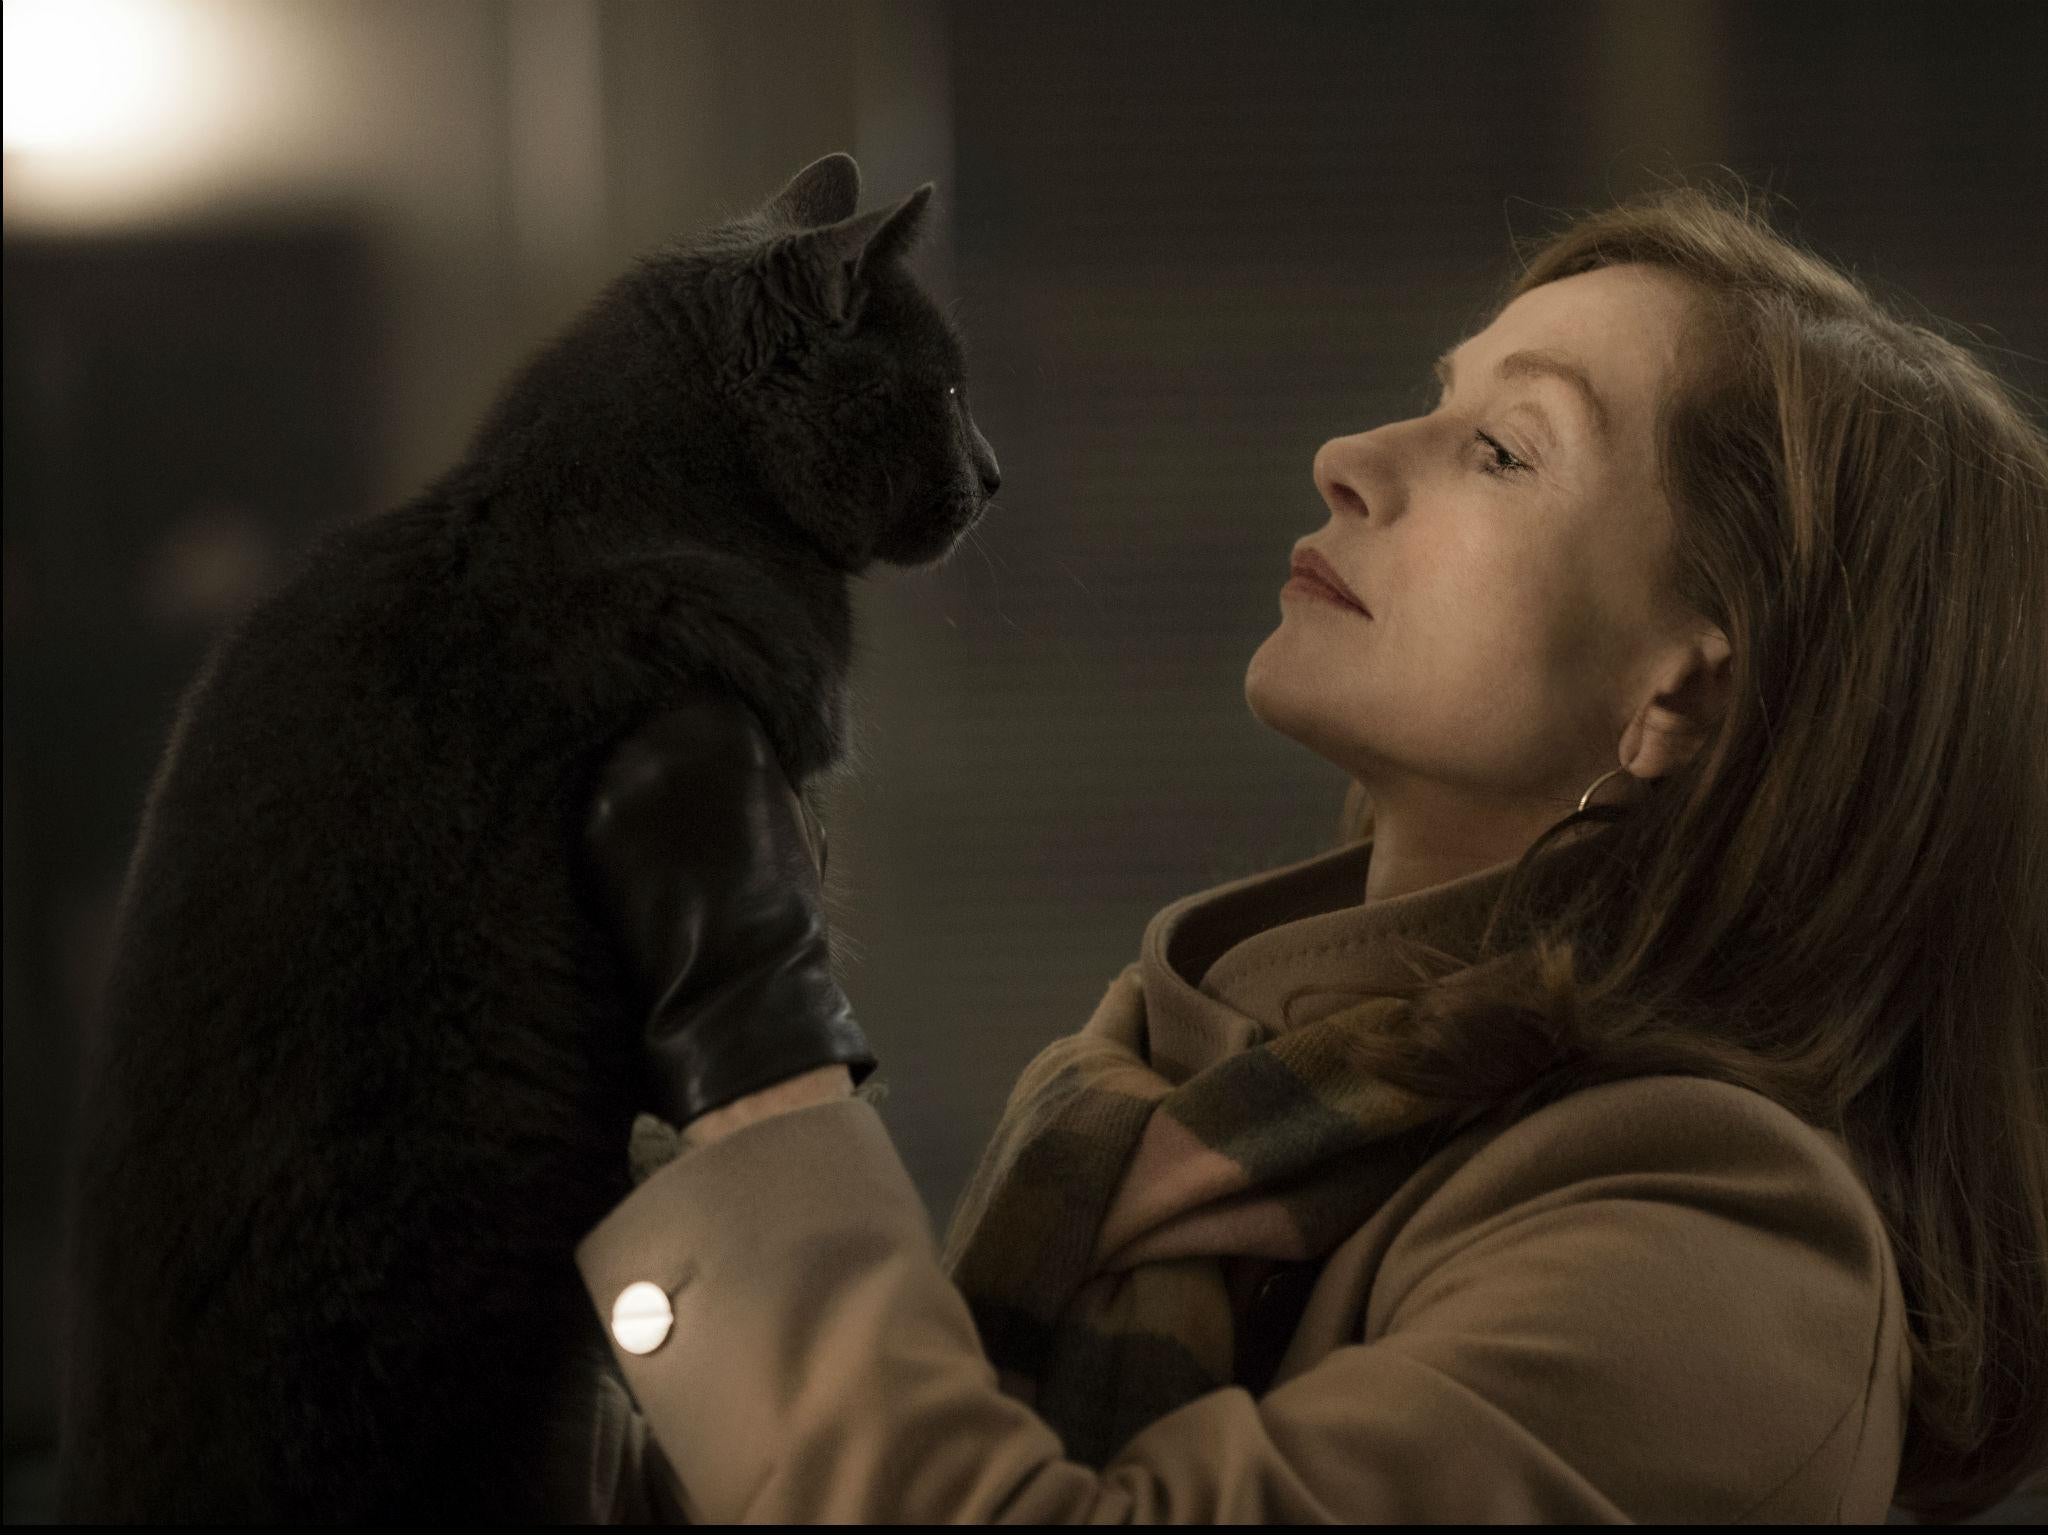 Huppert as Michéle with her cat who witnesses the rape with an intrigued, passive expression in 'Elle'